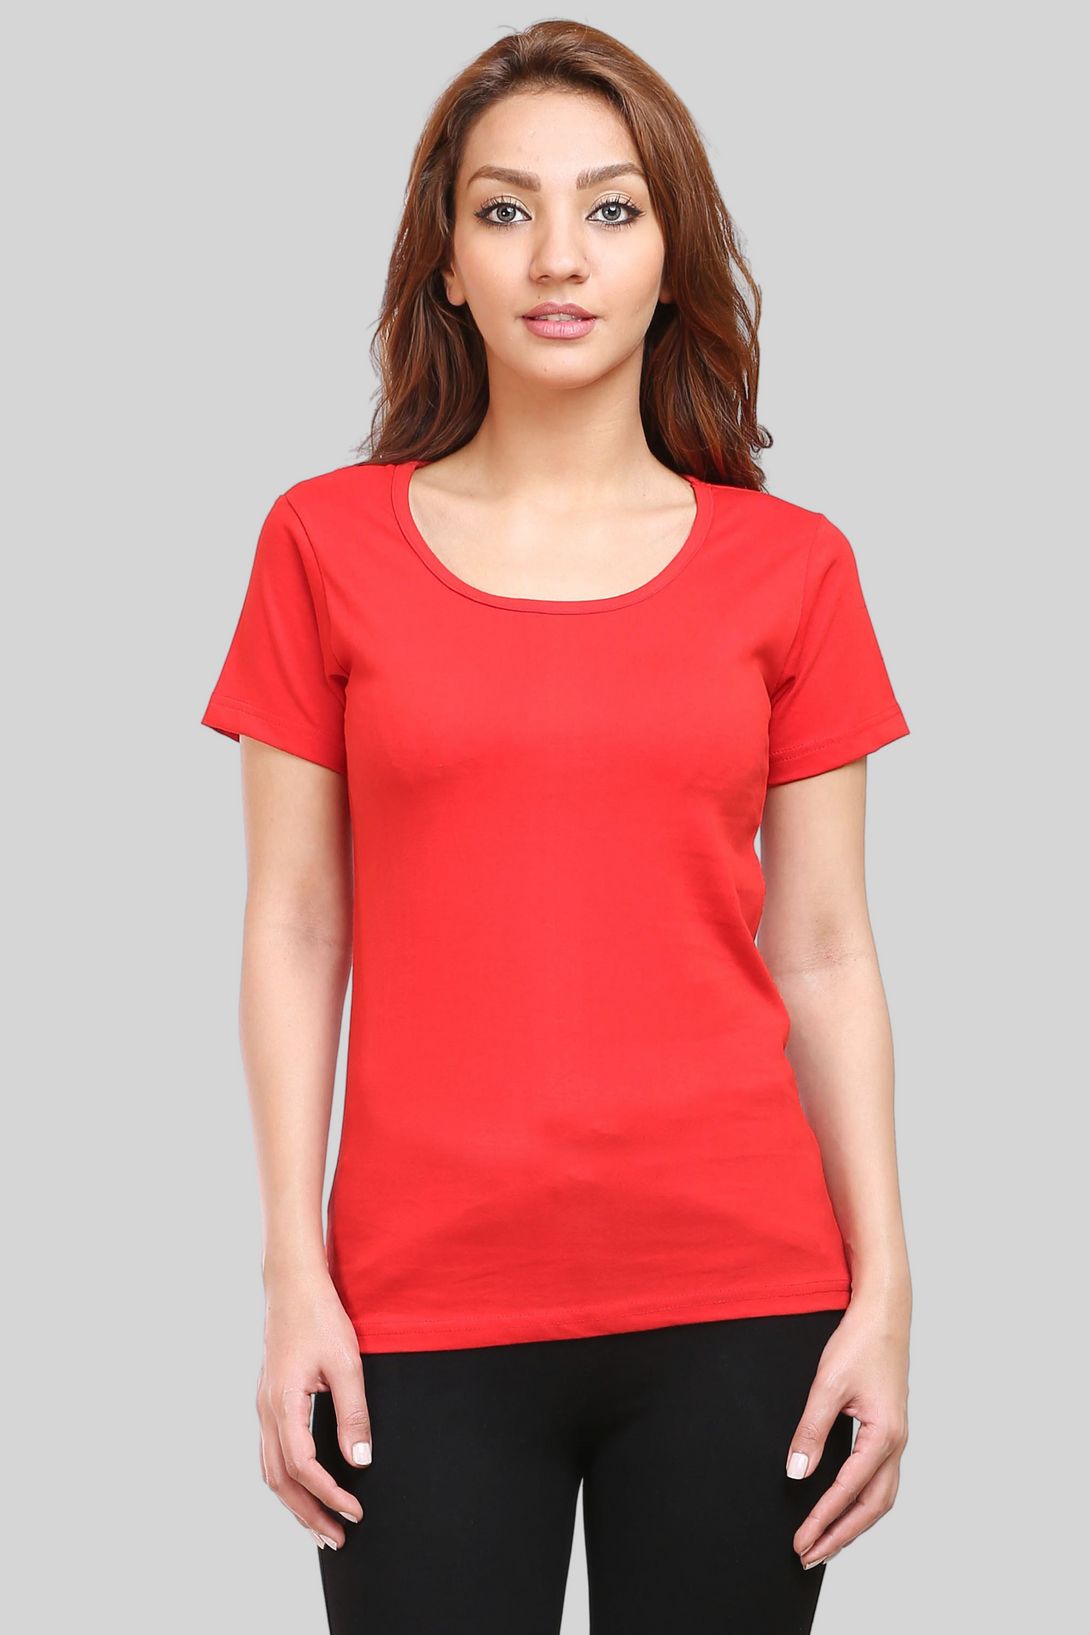 Red Scoop Neck T-Shirt For Women - WowWaves - 4